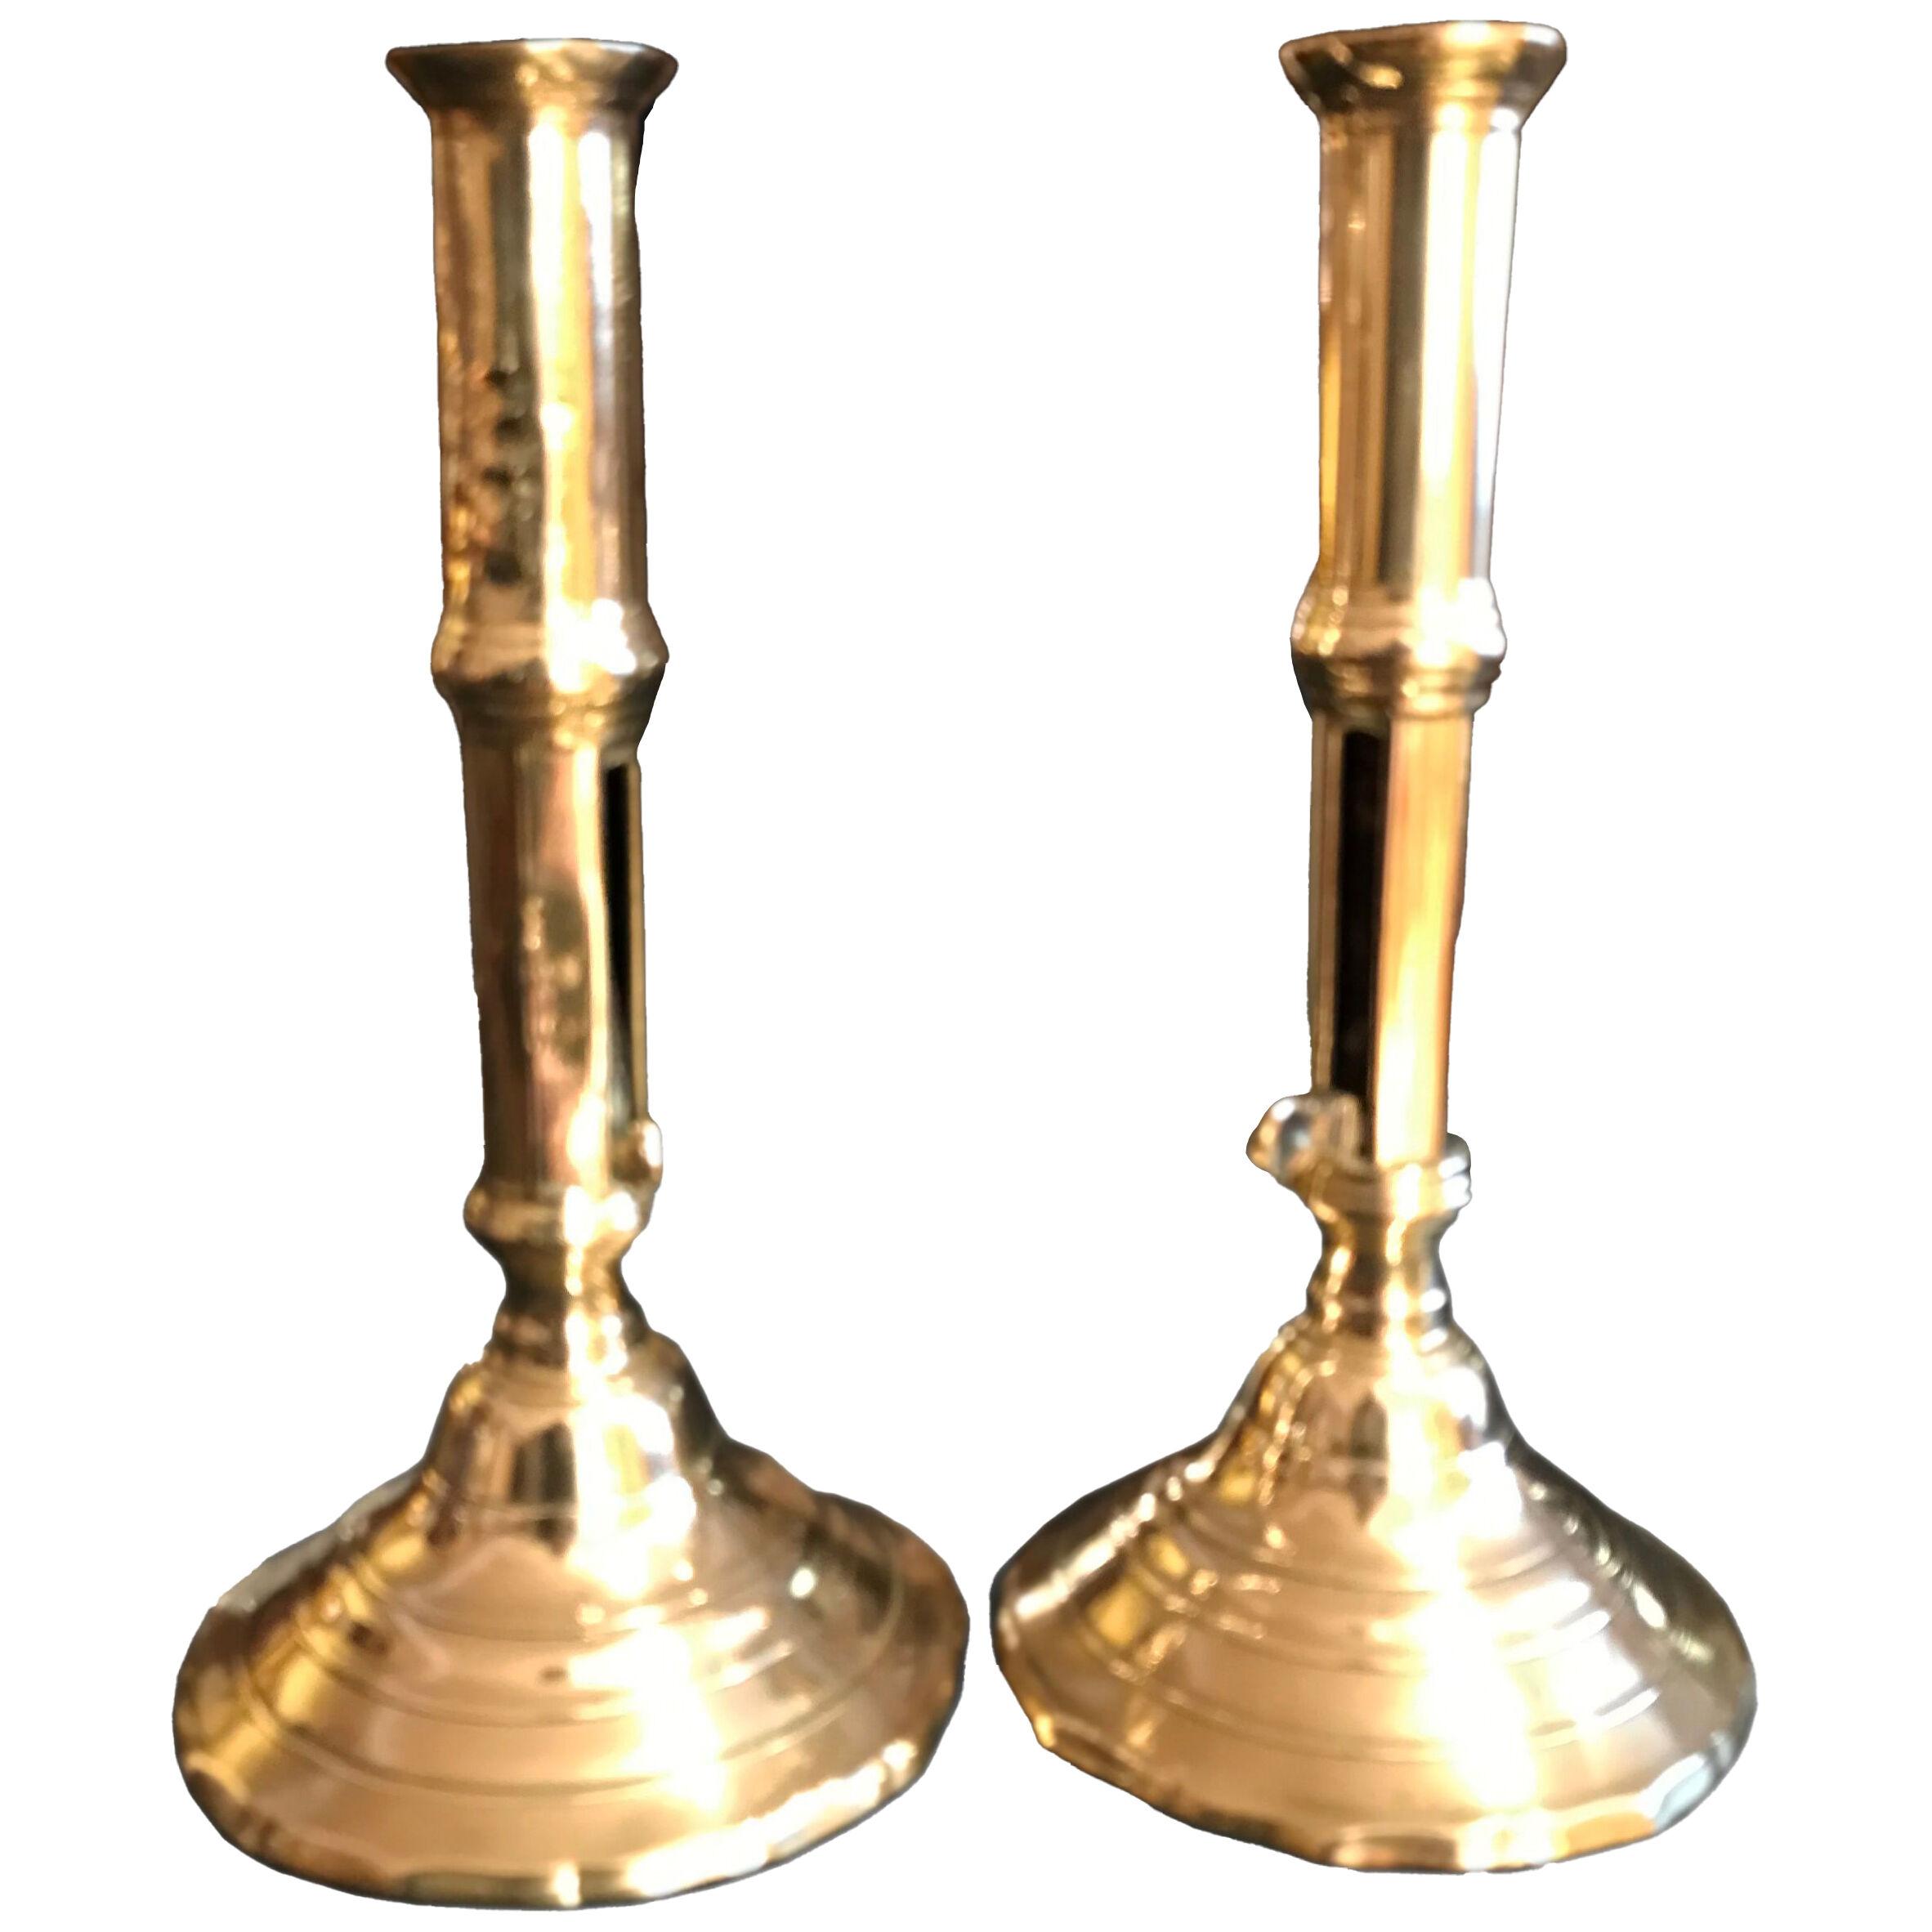 Pair of Mid 18th Century Brass Ejector Candlesticks